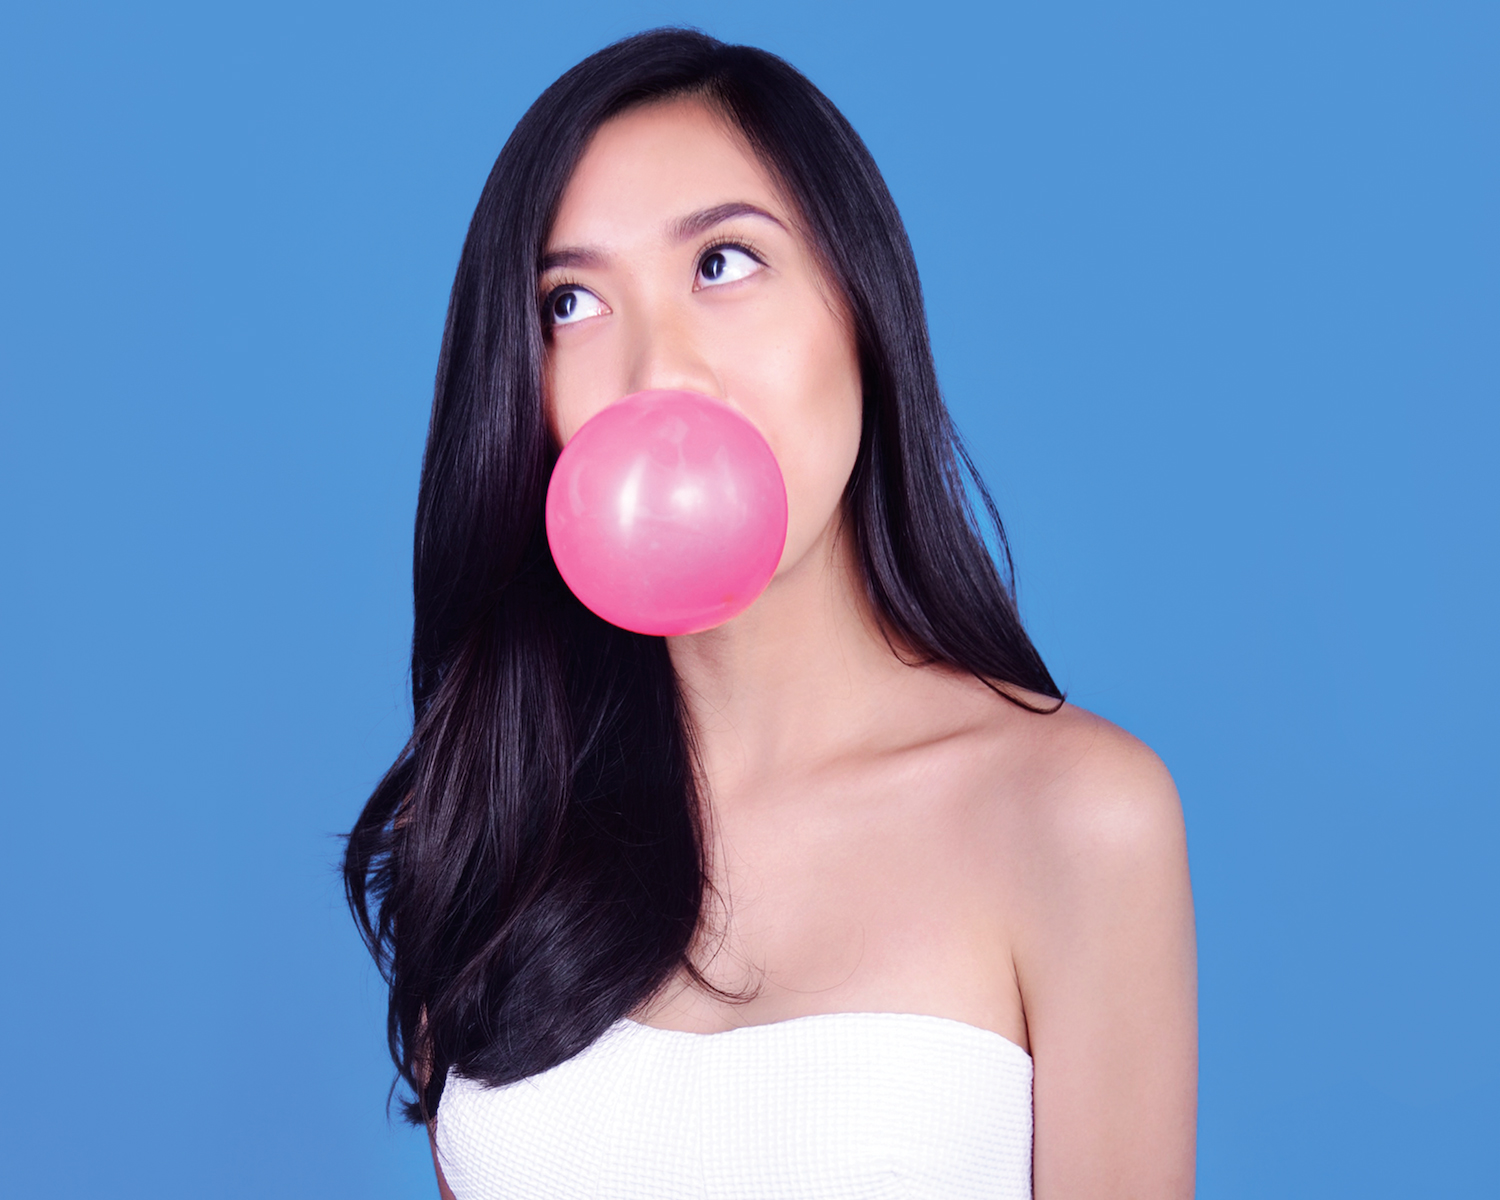 A photo of a woman wearing a white dress and blowing a pink balloon or gum ball.